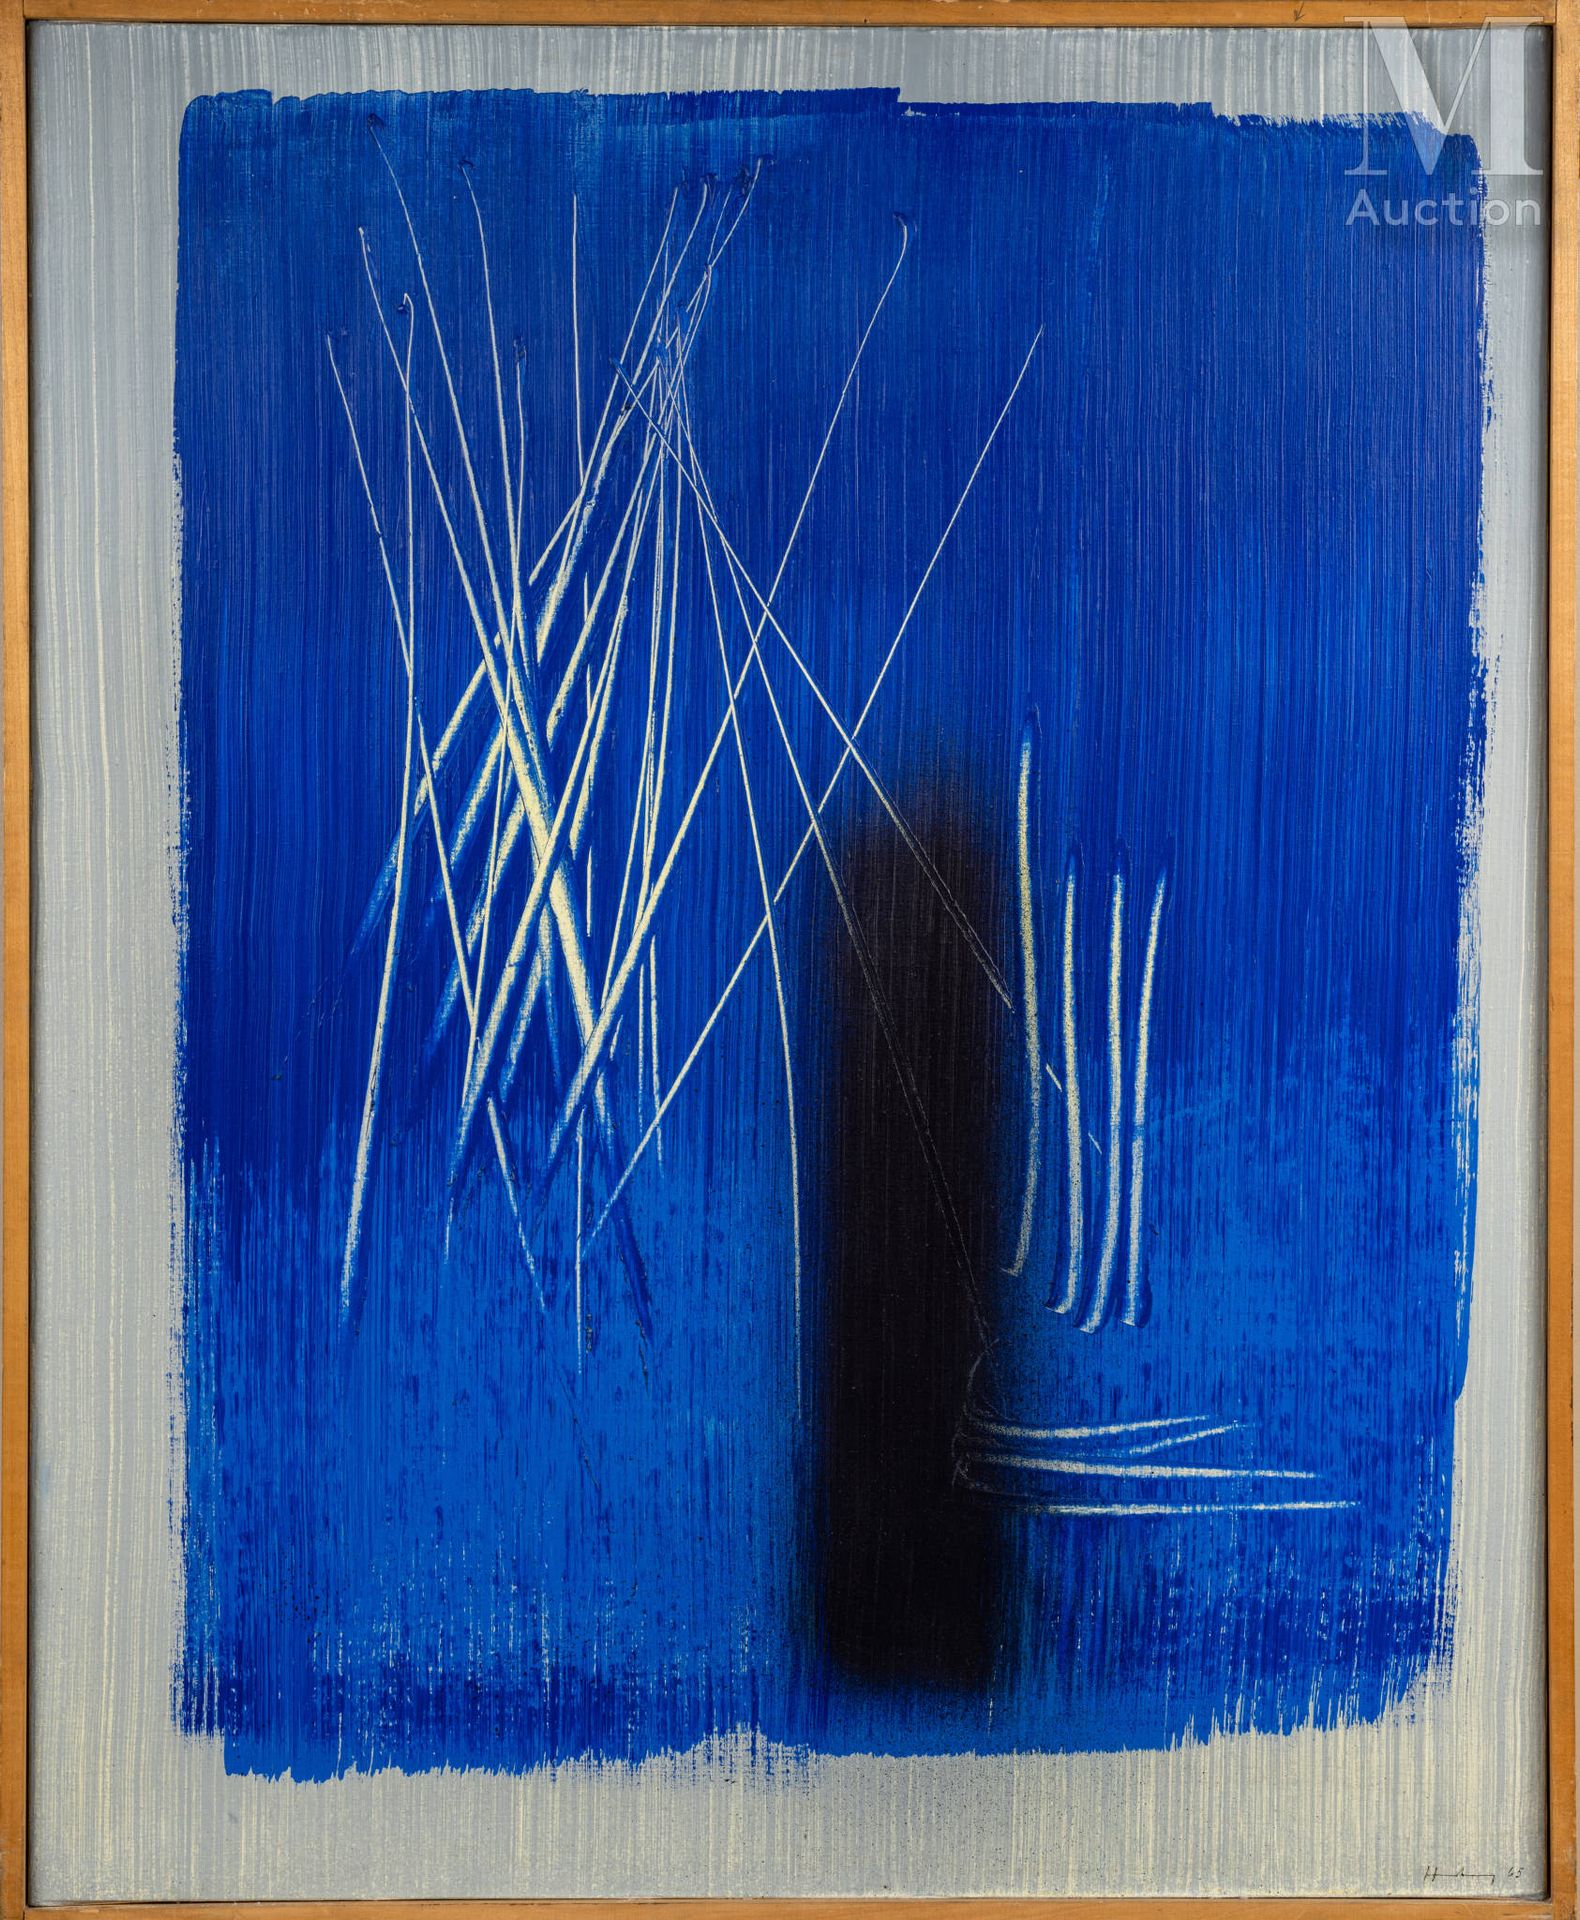 Hans HARTUNG (1904-1989) T1965-H10, 1965

Acrylic and scratch on canvas signed a&hellip;